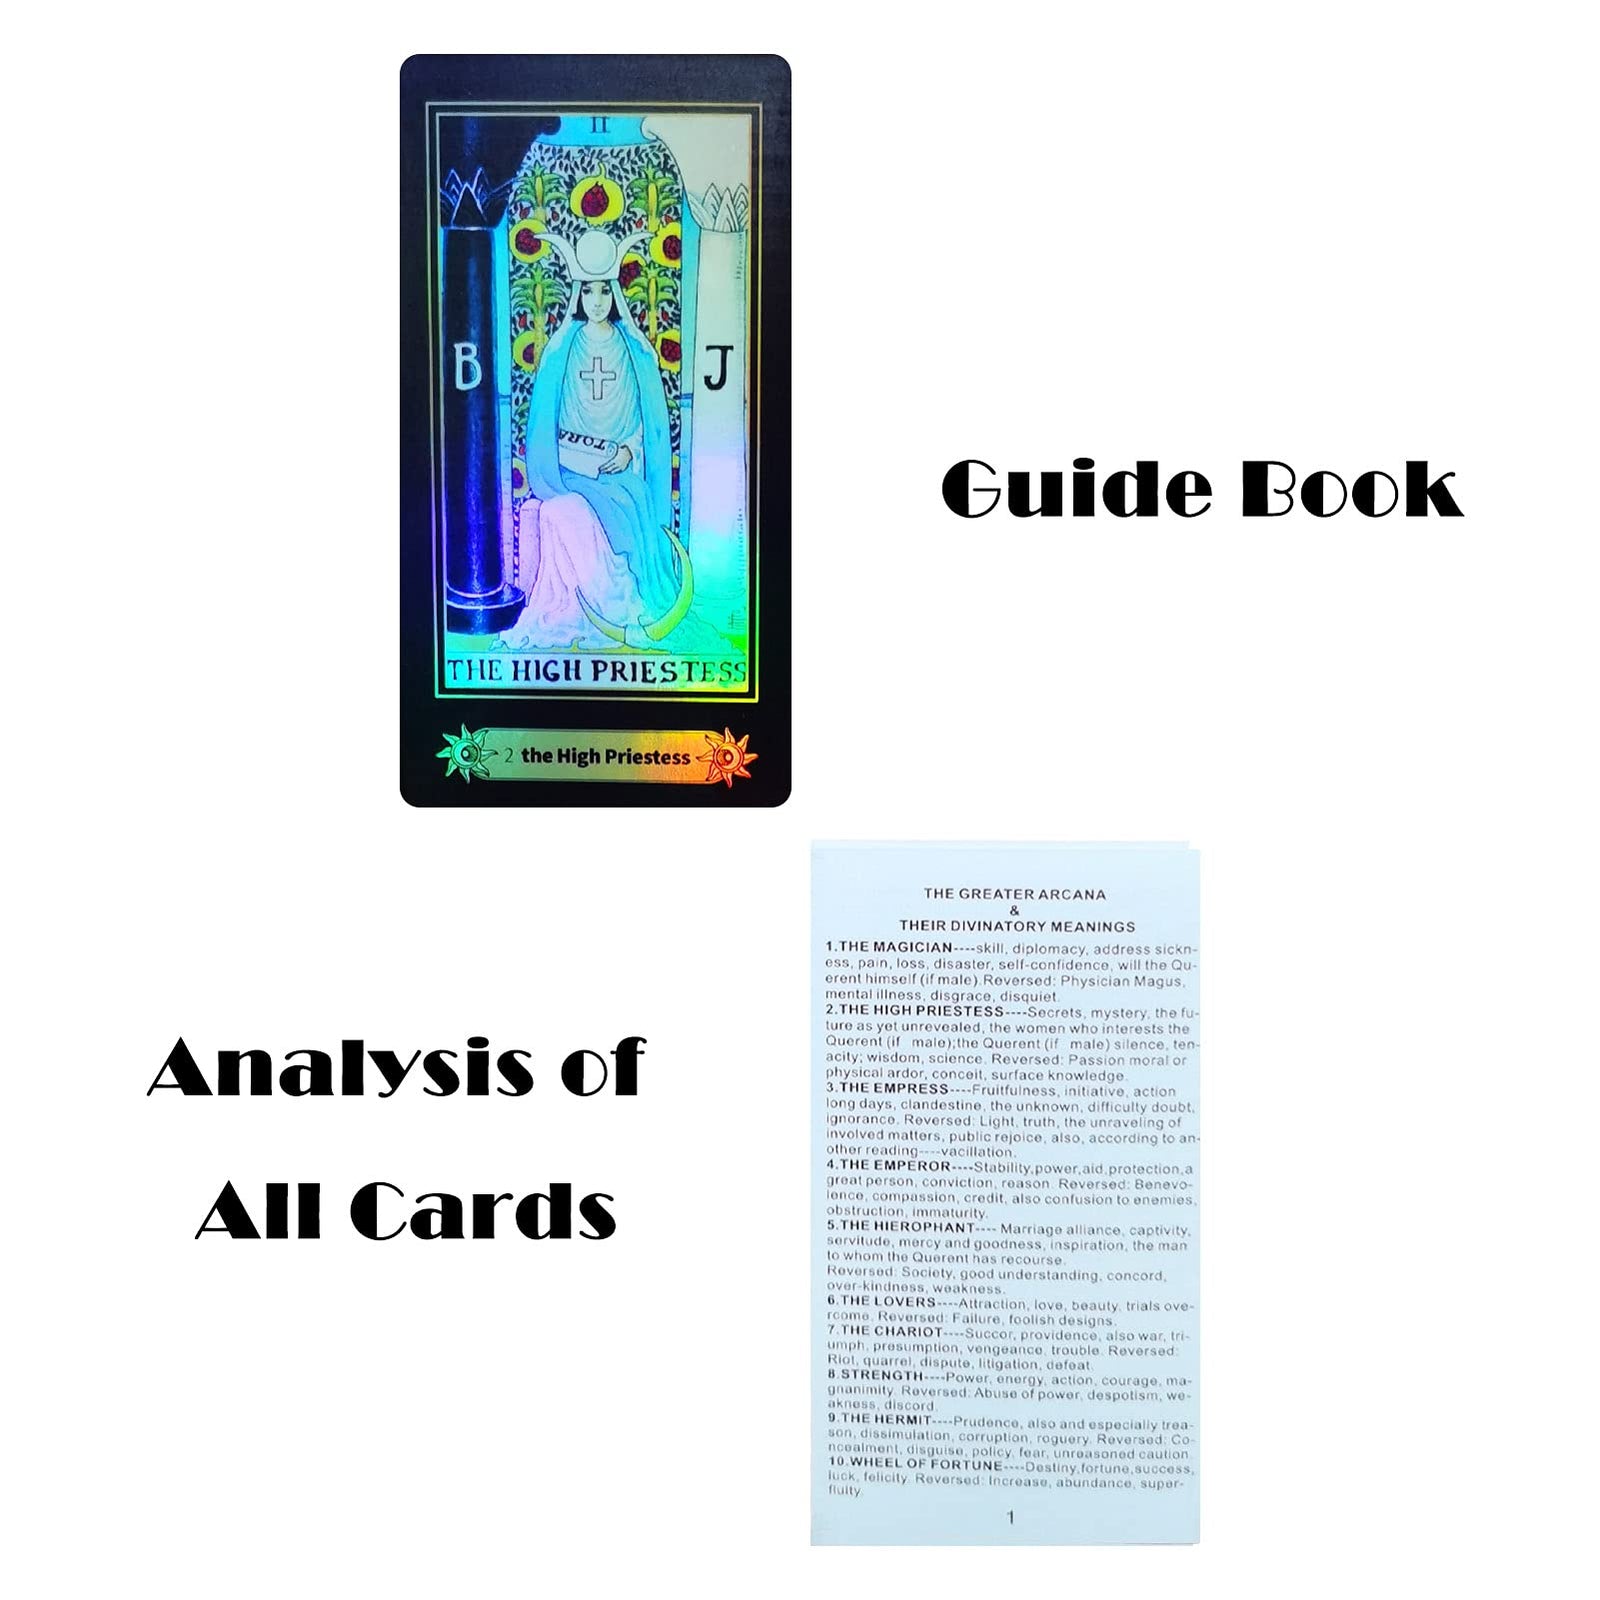 78 Holographic Tarot Cards, Rider Waite Tarot Cards with Guidebook, Tarot Cards Deck Future Telling Game